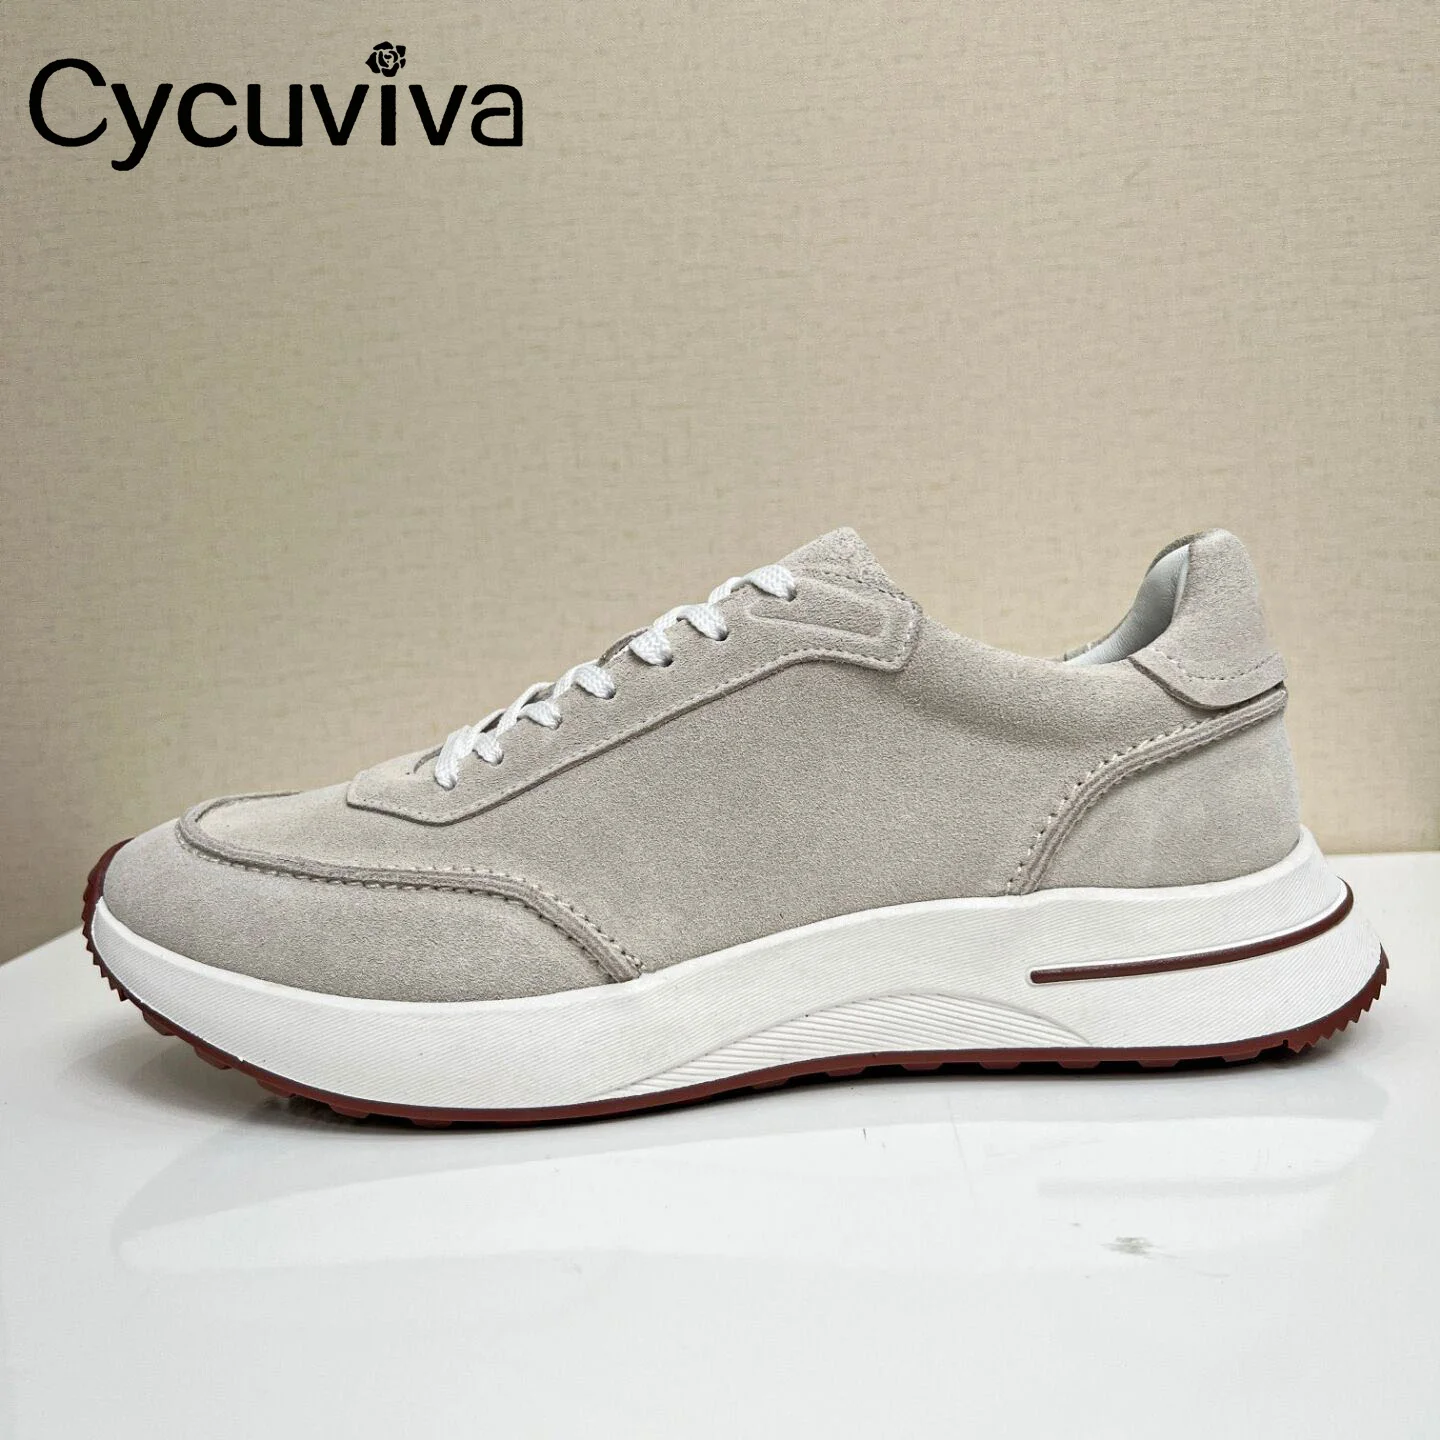 T platform lace up sneakers men spring suede leather flat casual shoes for wan designer thumb200